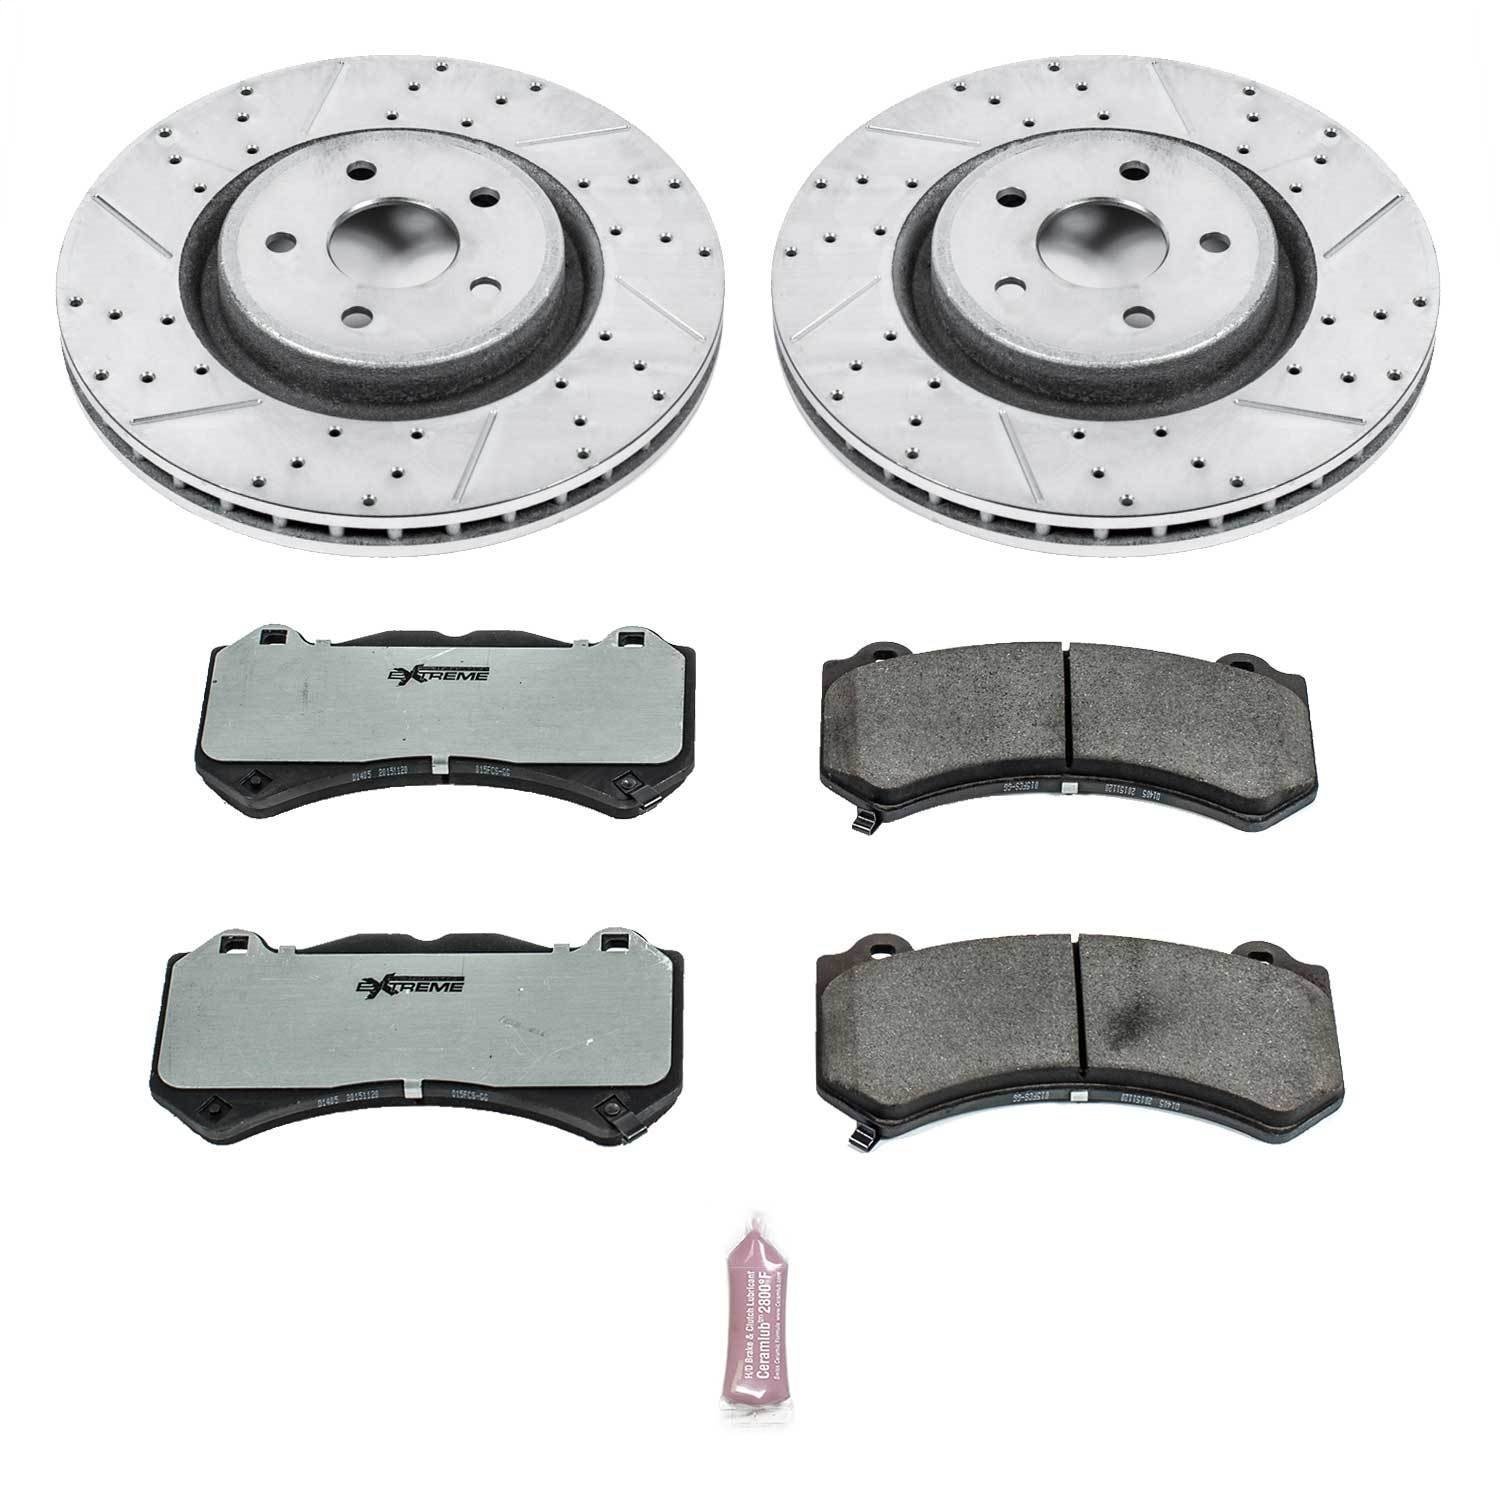 Street Warrior Brake Upgrade Kit Cross-Drilled and Slotted Rotors Z26 Extreme Street Performance Brake Pads Complete Front Kit